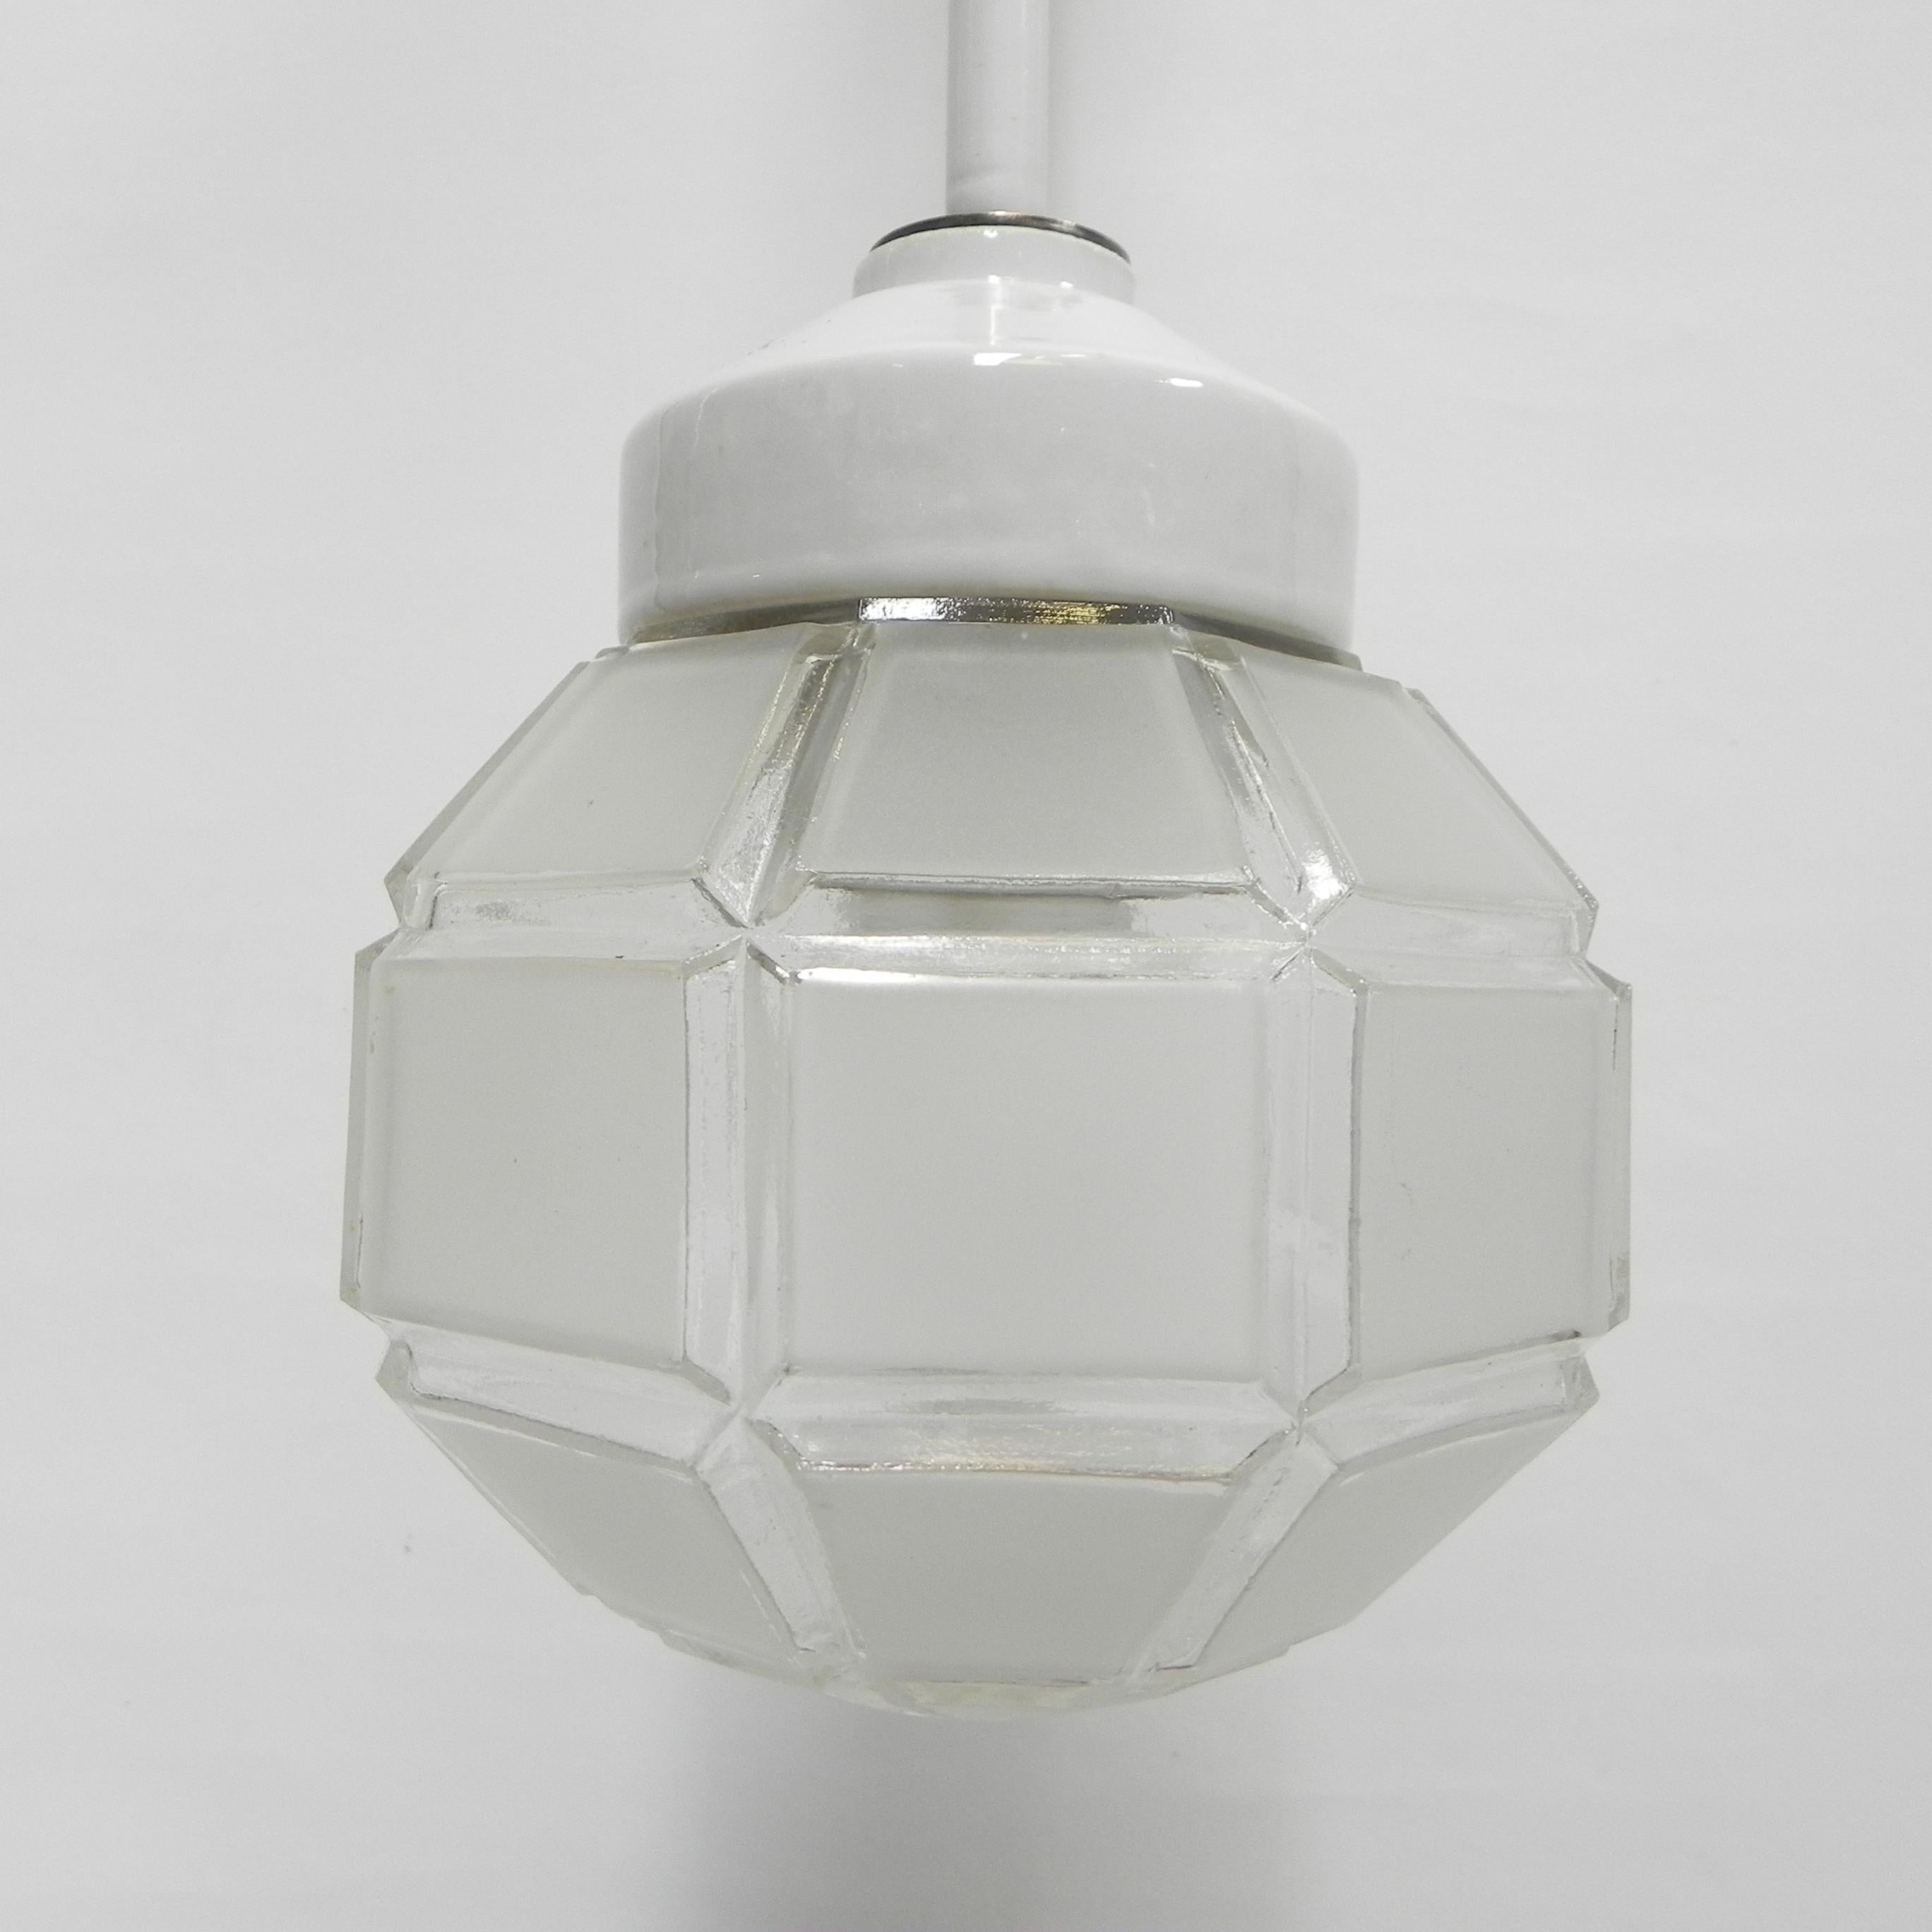 This hanging lamp has a porcelain shade holder at the bottom
and a porcelain ceiling cover at the top.
Connected by an enamelled steel rod.
The frosted glass shade is screwed into the porcelain shade holder.

Total length: 68 cm.
Ø glass shade: 17